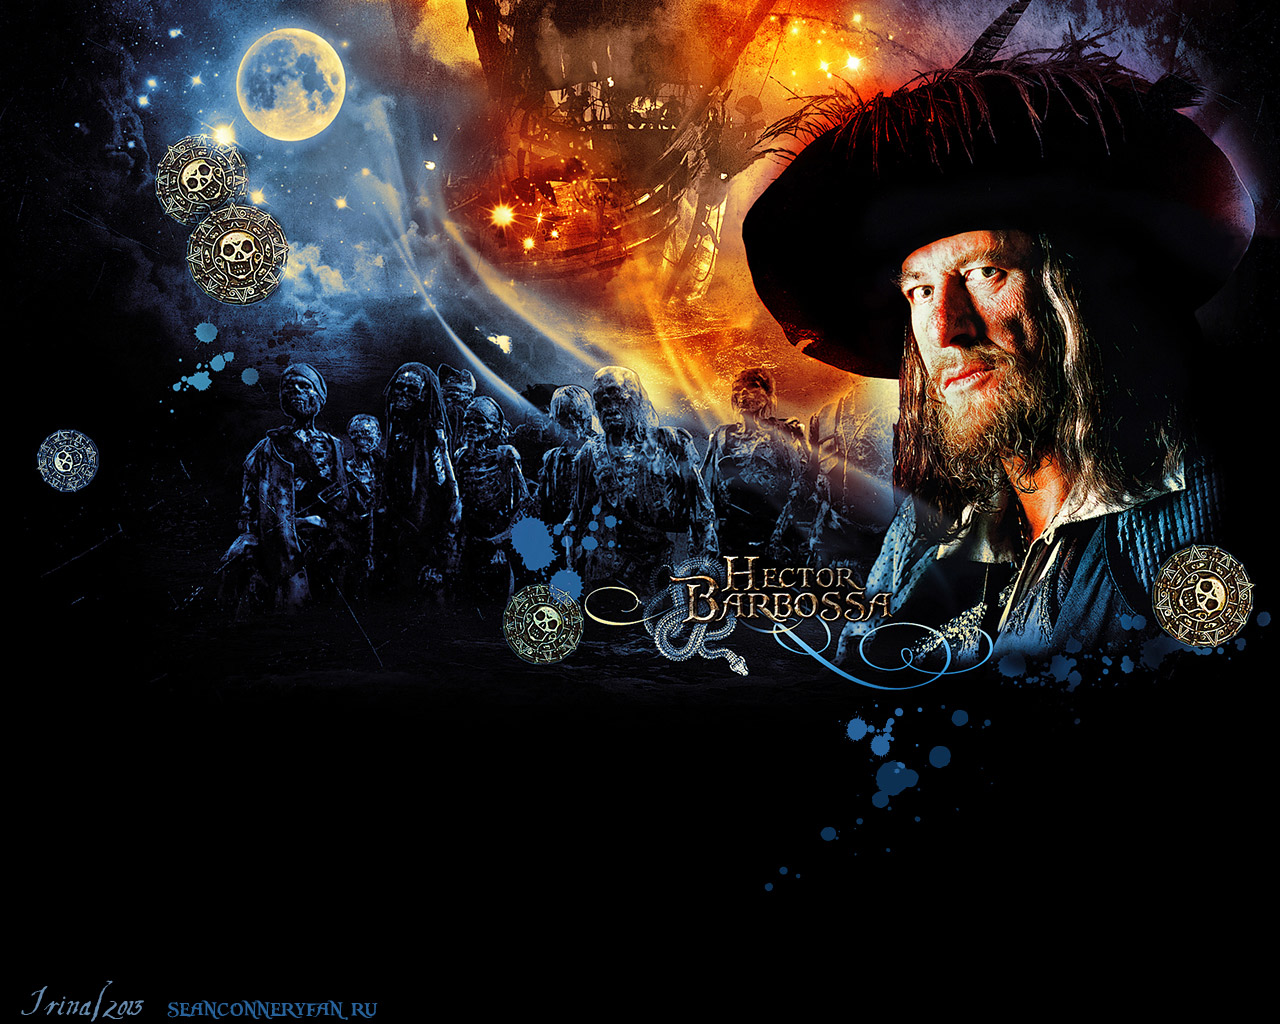   .    (Pirates of the Caribbean. The Curse of the Black Pearl).   (Geoffrey Rush)  Wallpaper